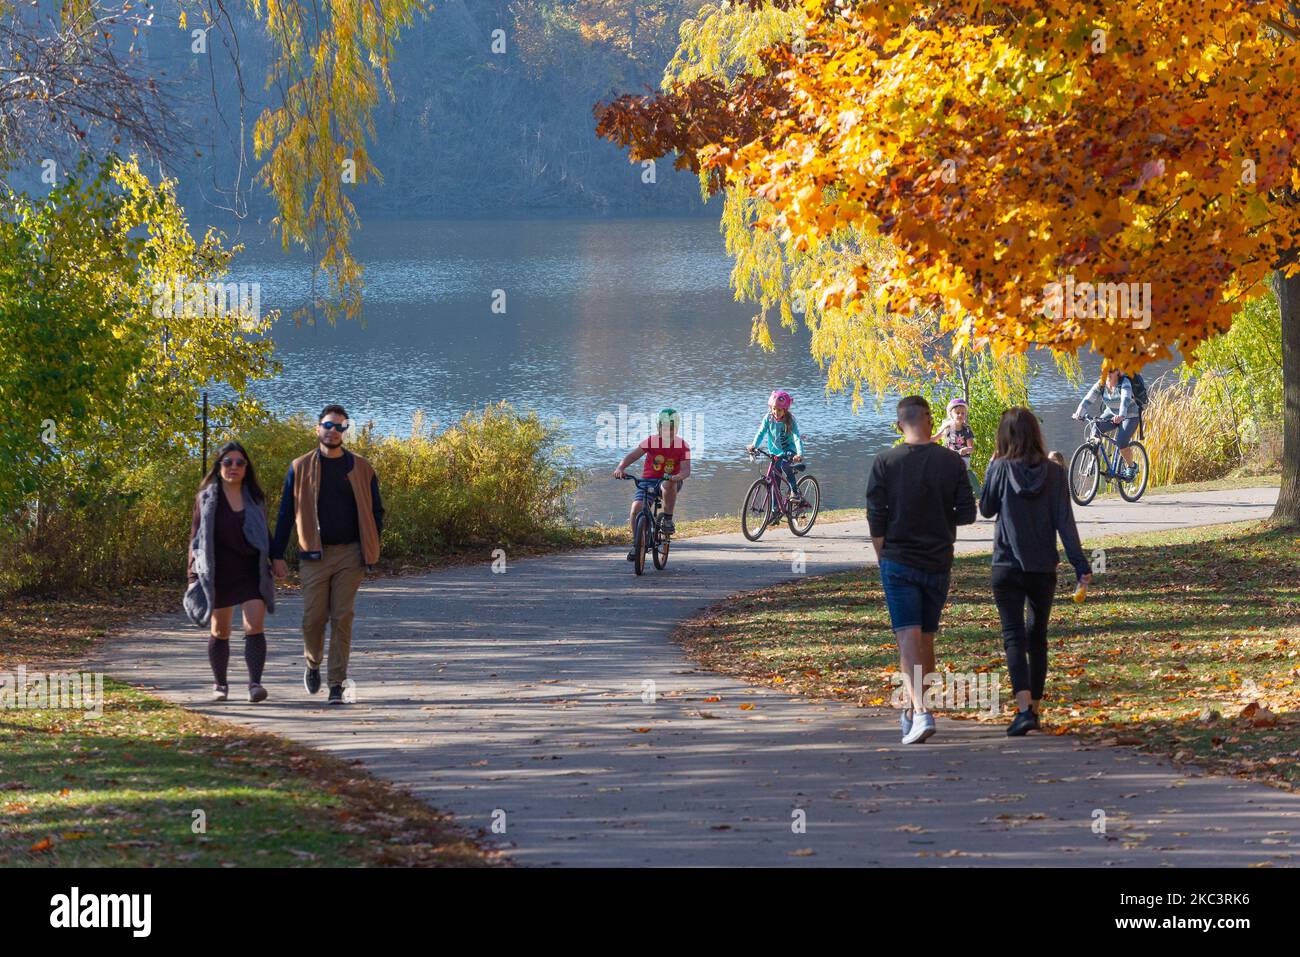 People enjoying a sunny day in High Park during unusually warm weather with temperatures reach 20 degrees Celsius on November 10, 2020 in High Park, Toronto, Canada. (Photo by Anatoliy Cherkasov/NurPhoto) Stock Photo